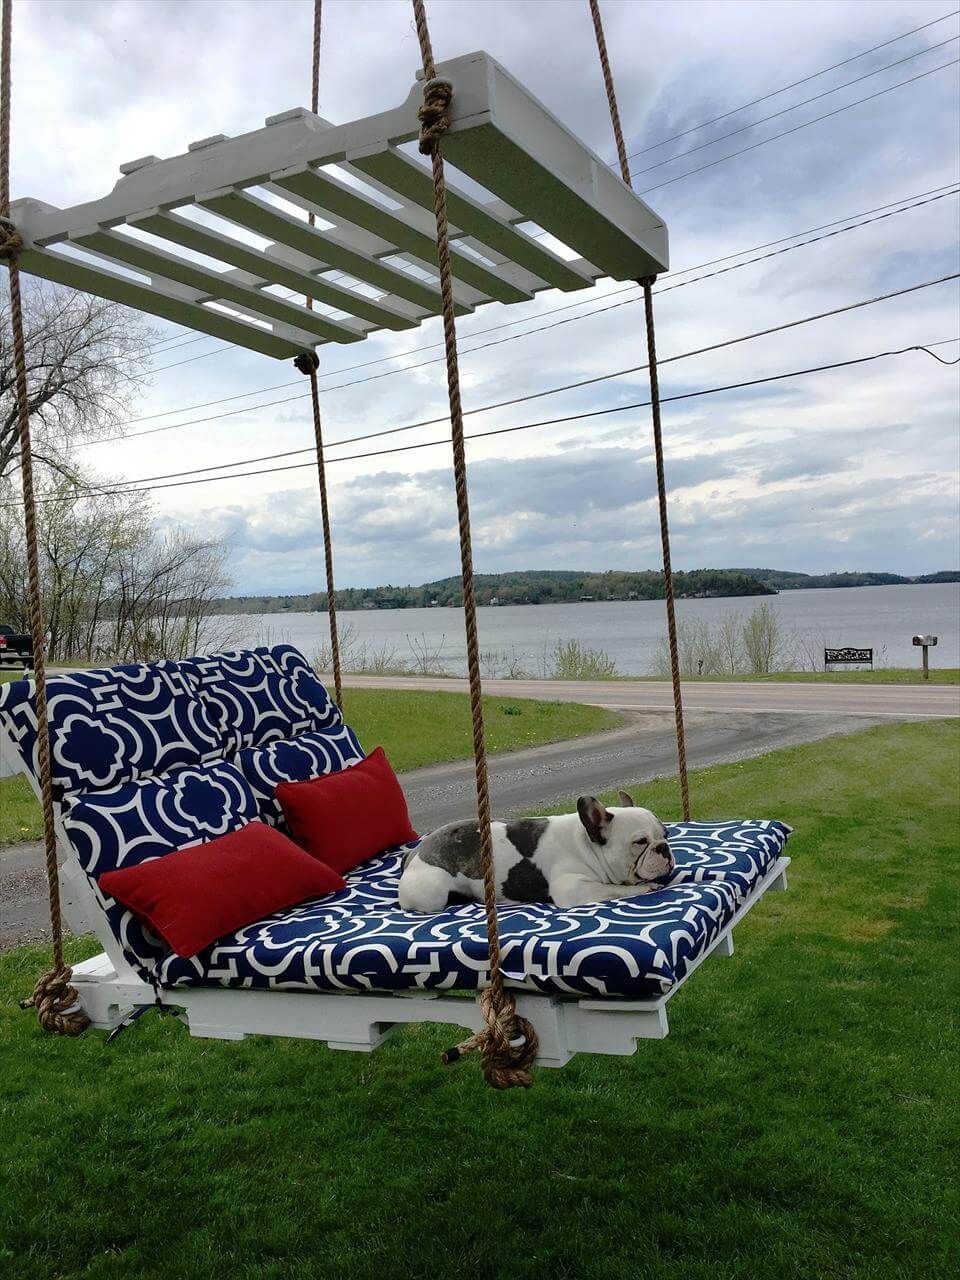 DIY Pallet Lounge Swing - Step by Step | 101 Pallets
 Pallet Patio Swing